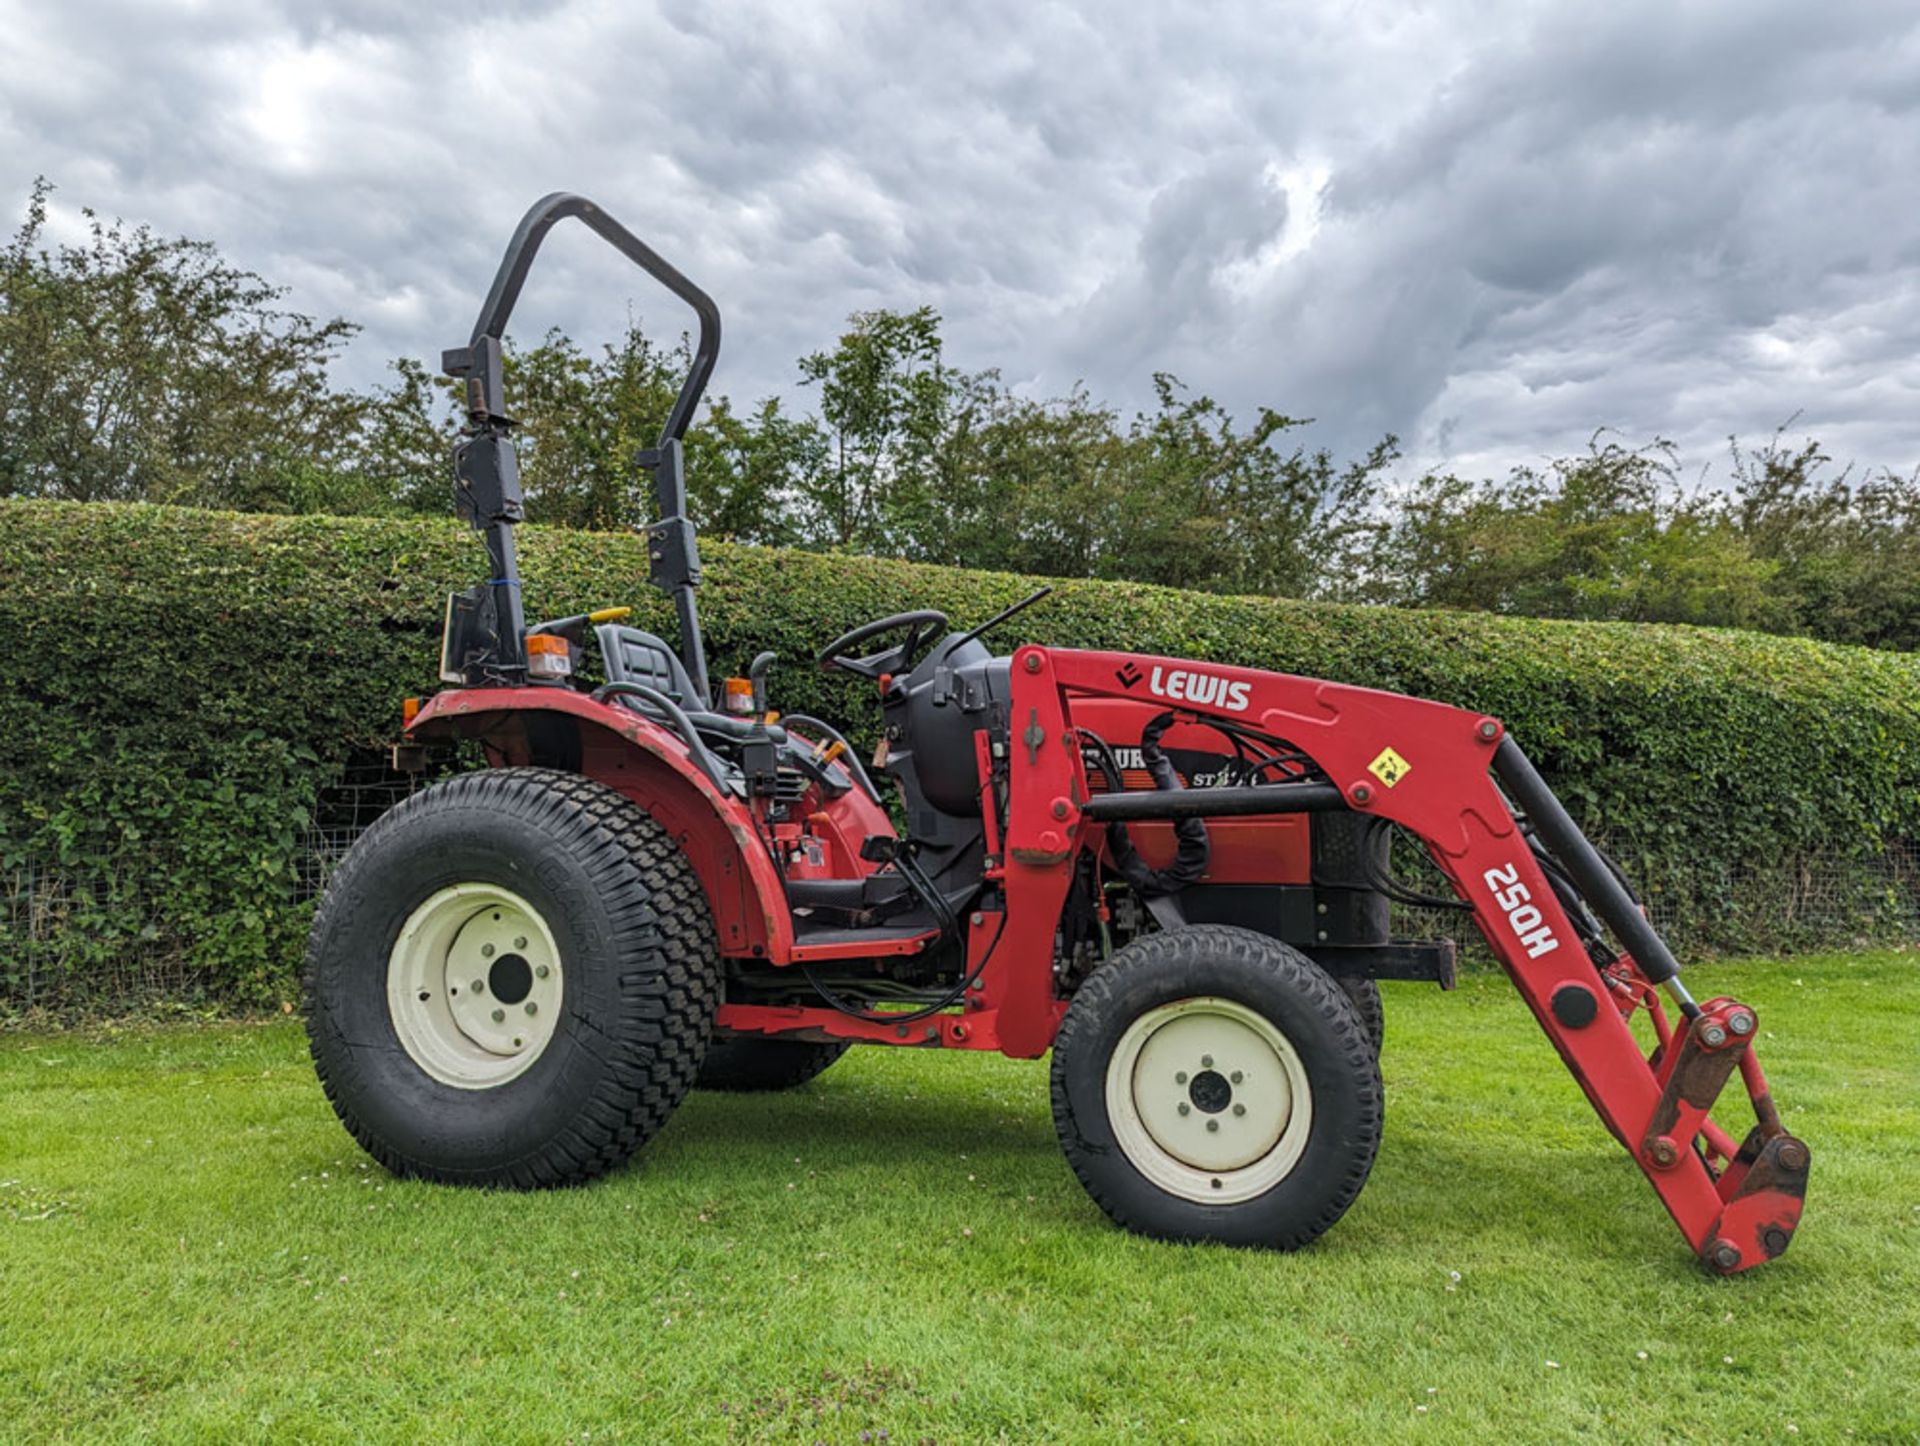 2013 Shibaura ST333 Compact Tractor With Lewis 25QH Loader Attachment 1848 Hours - Image 2 of 11